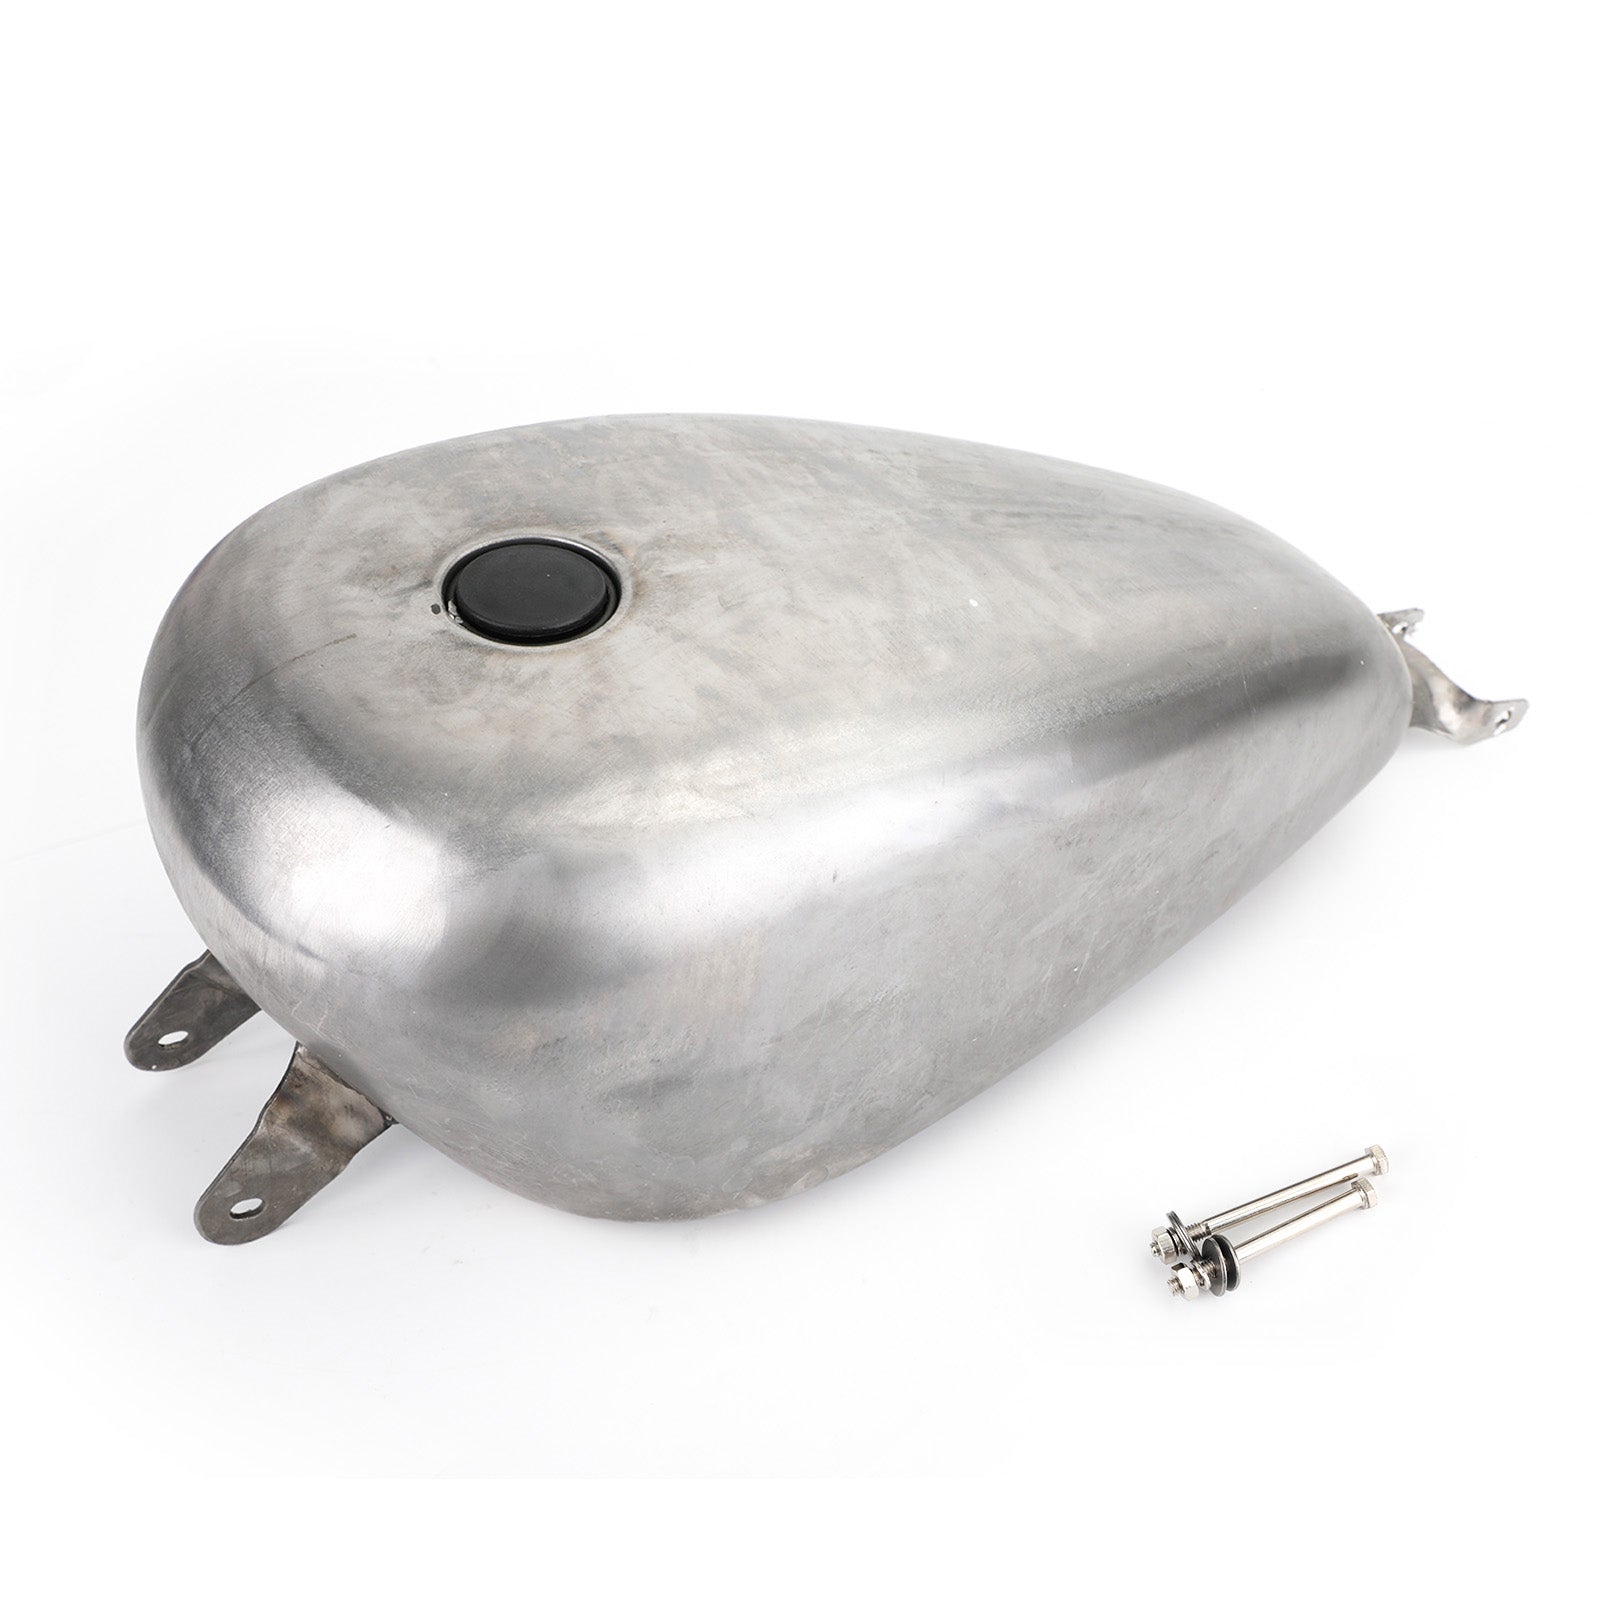 Motorcycle 14.4L 3.8 Gallon Gas Fuel Tank Fit for Harley Sportster XL